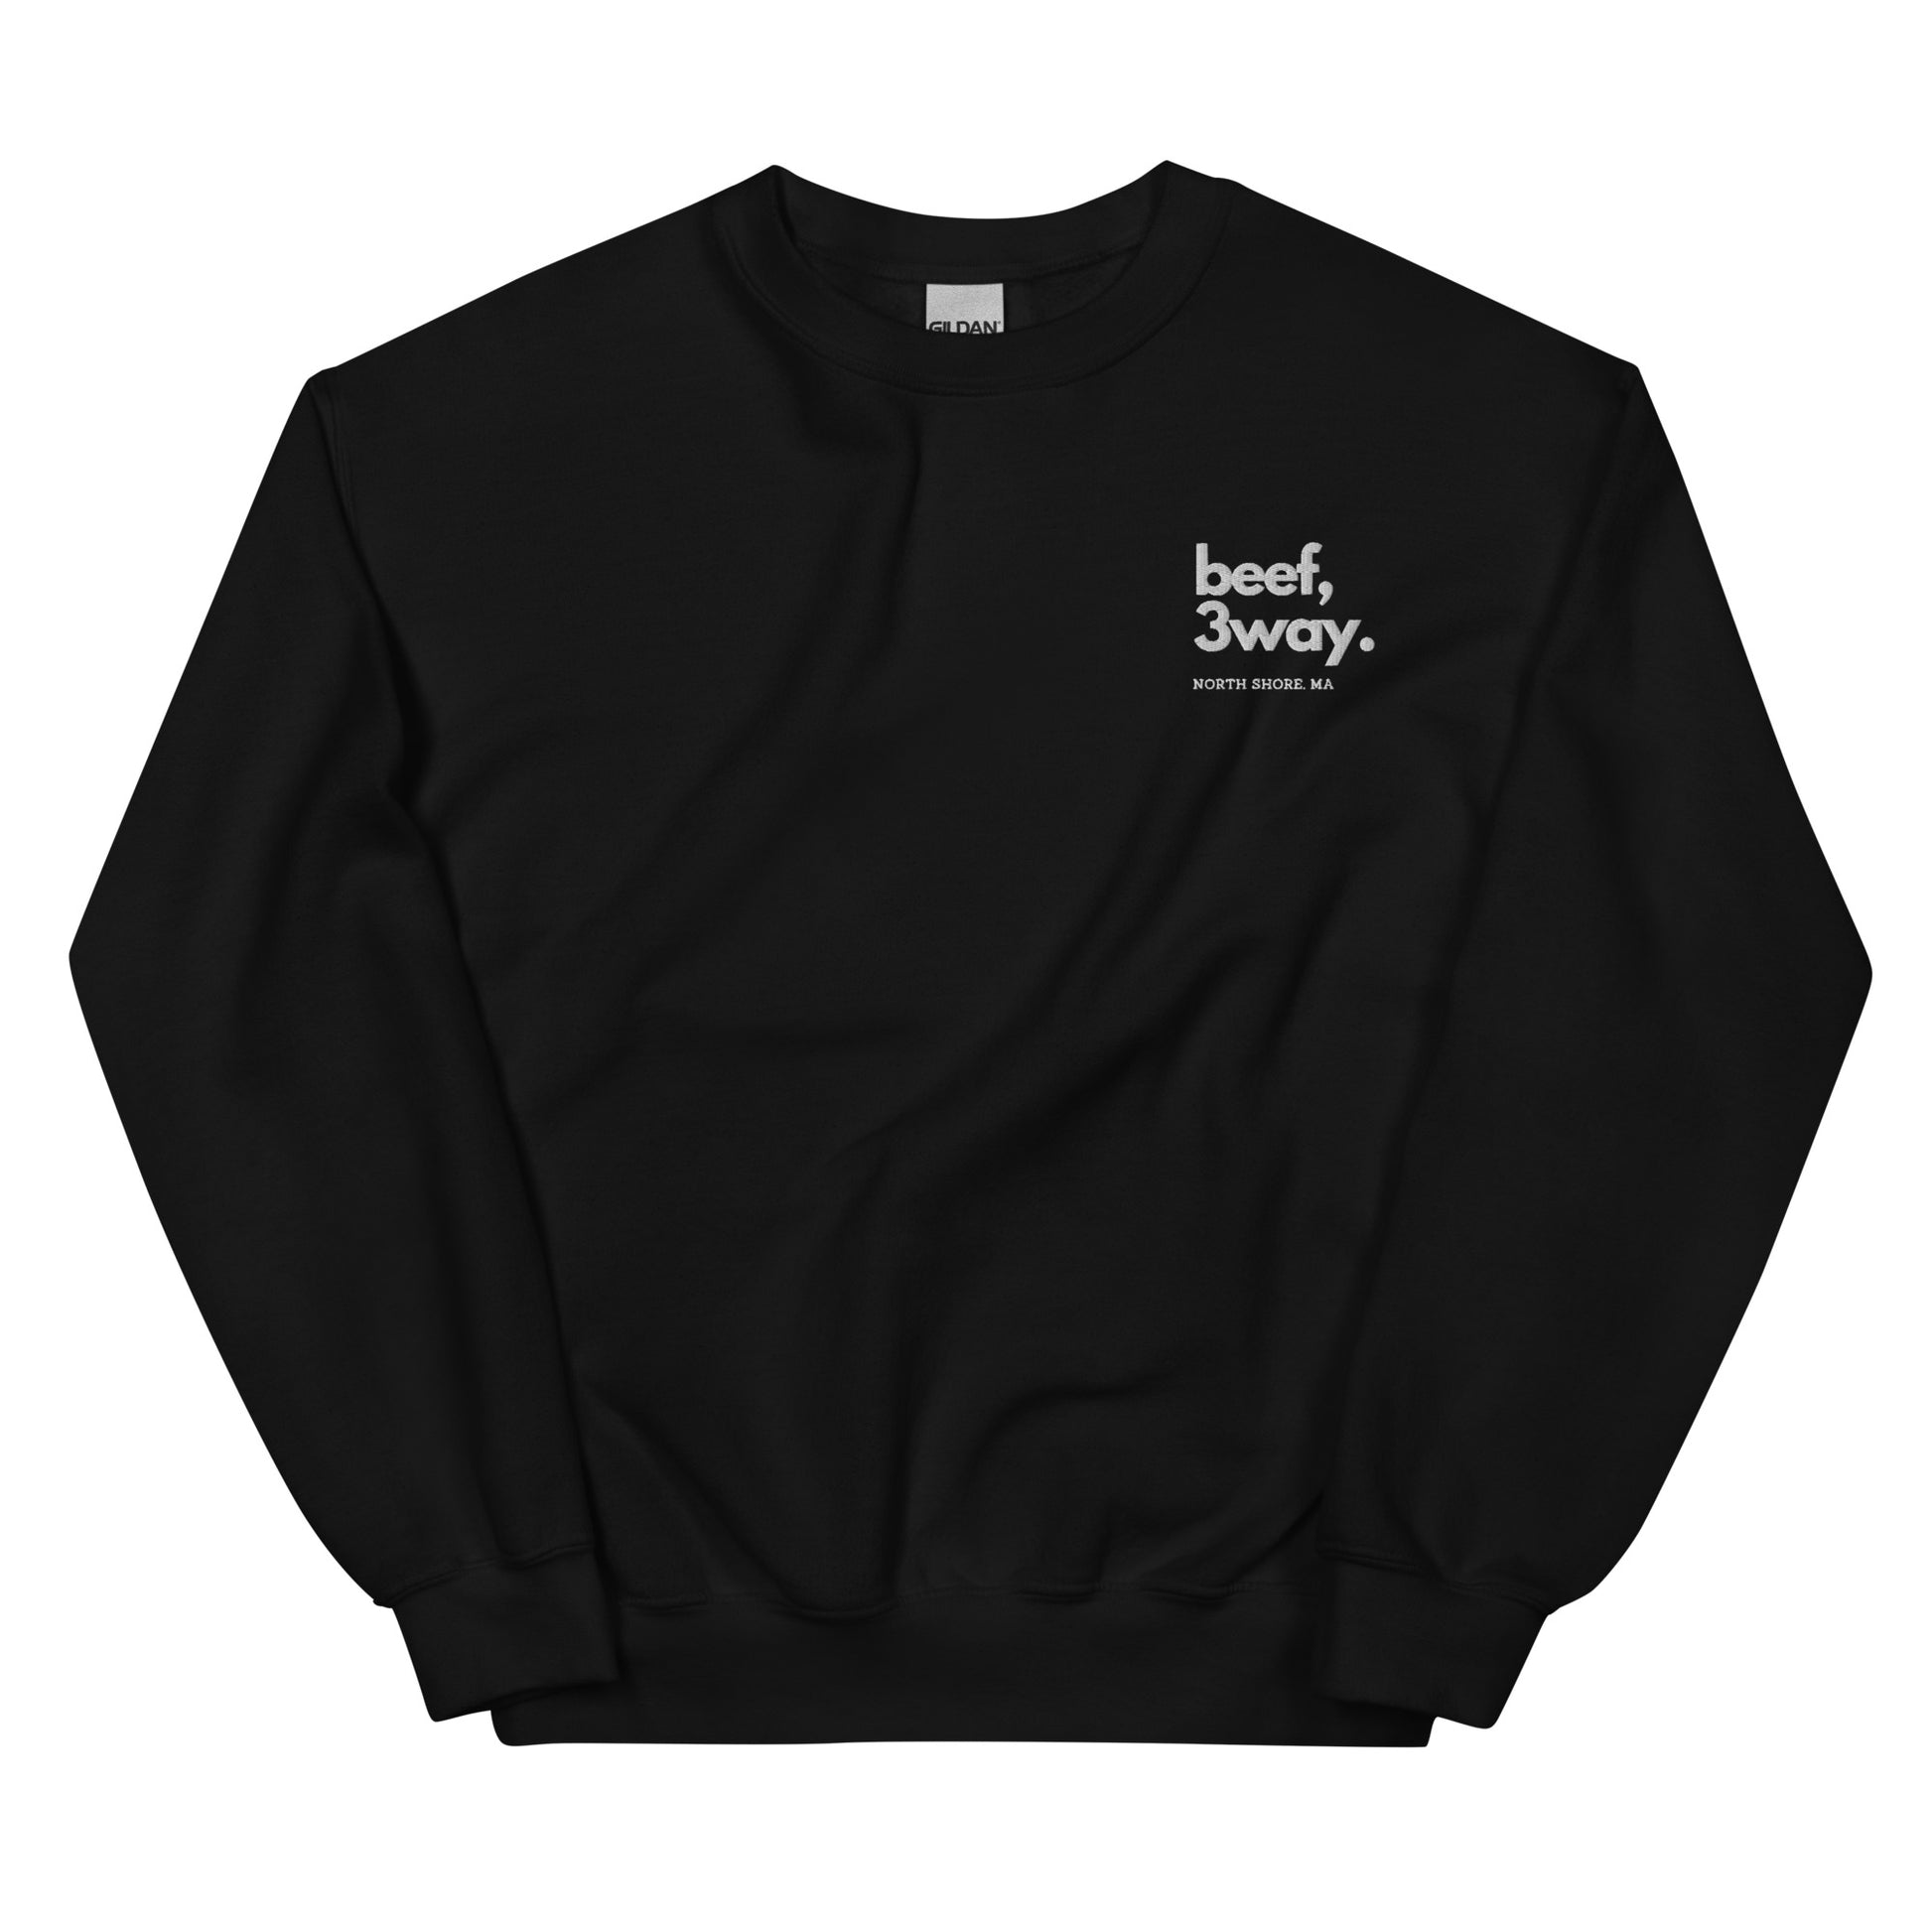 black crewneck that says "beef, 3way north shore ma" in white lettering